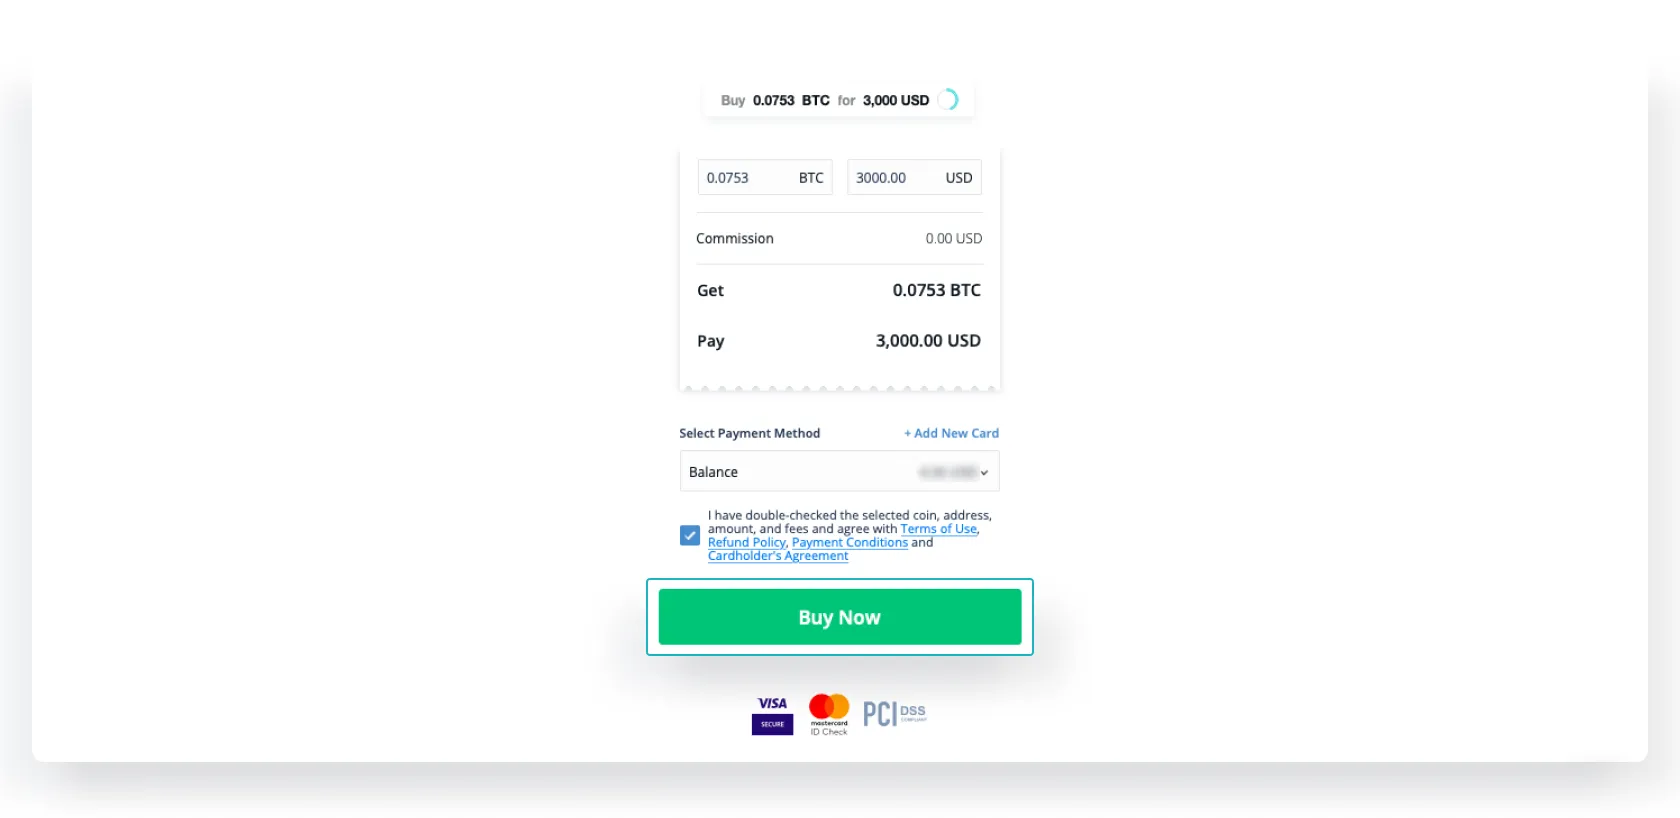 How to use Crypto at checkout? | PayPal US